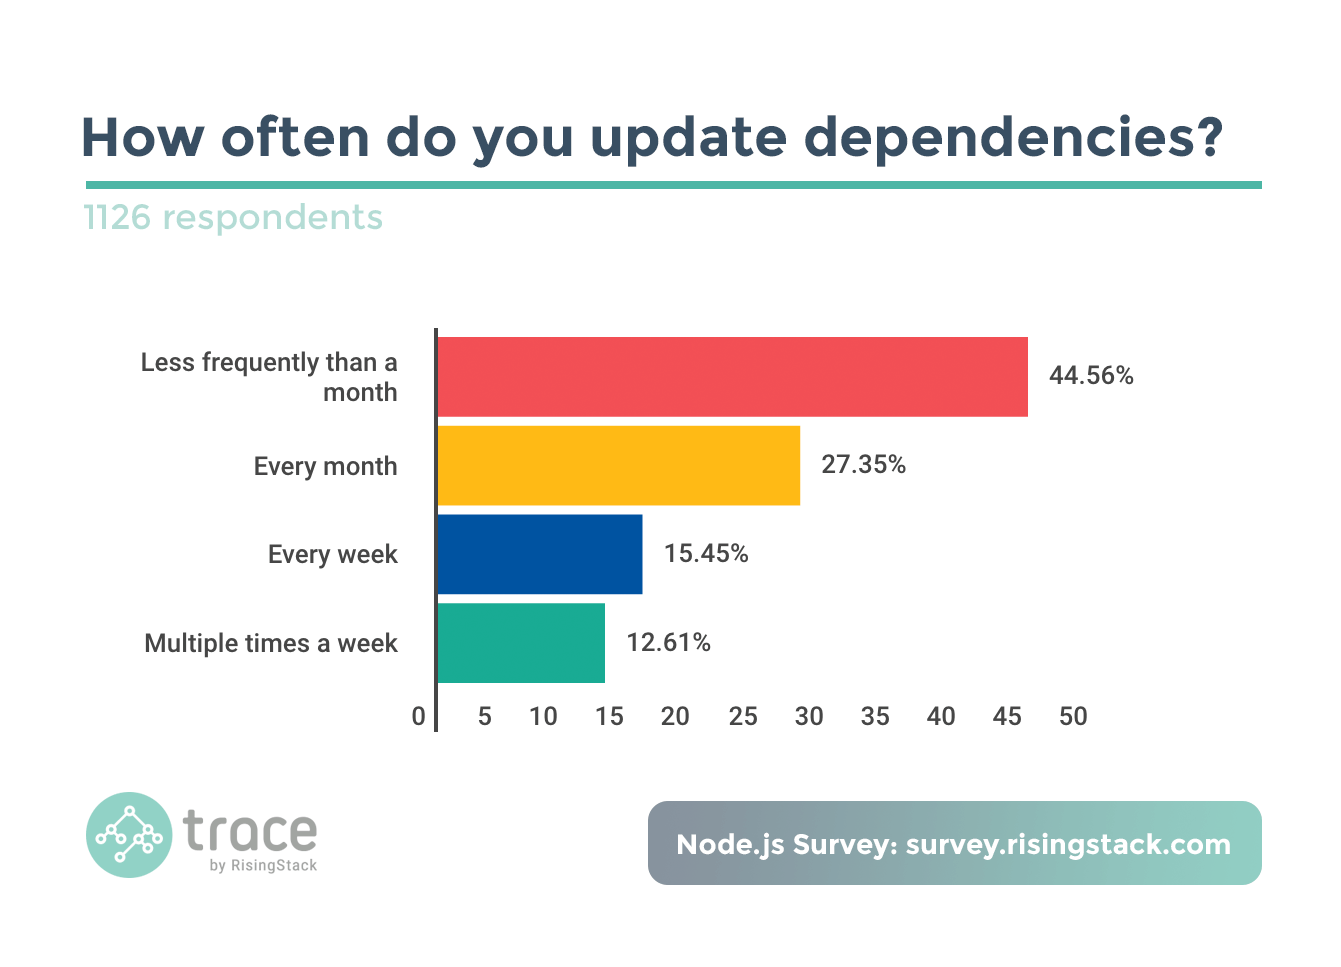 Node.js Survey - How often do you update dependencies? Less frequently than a month.